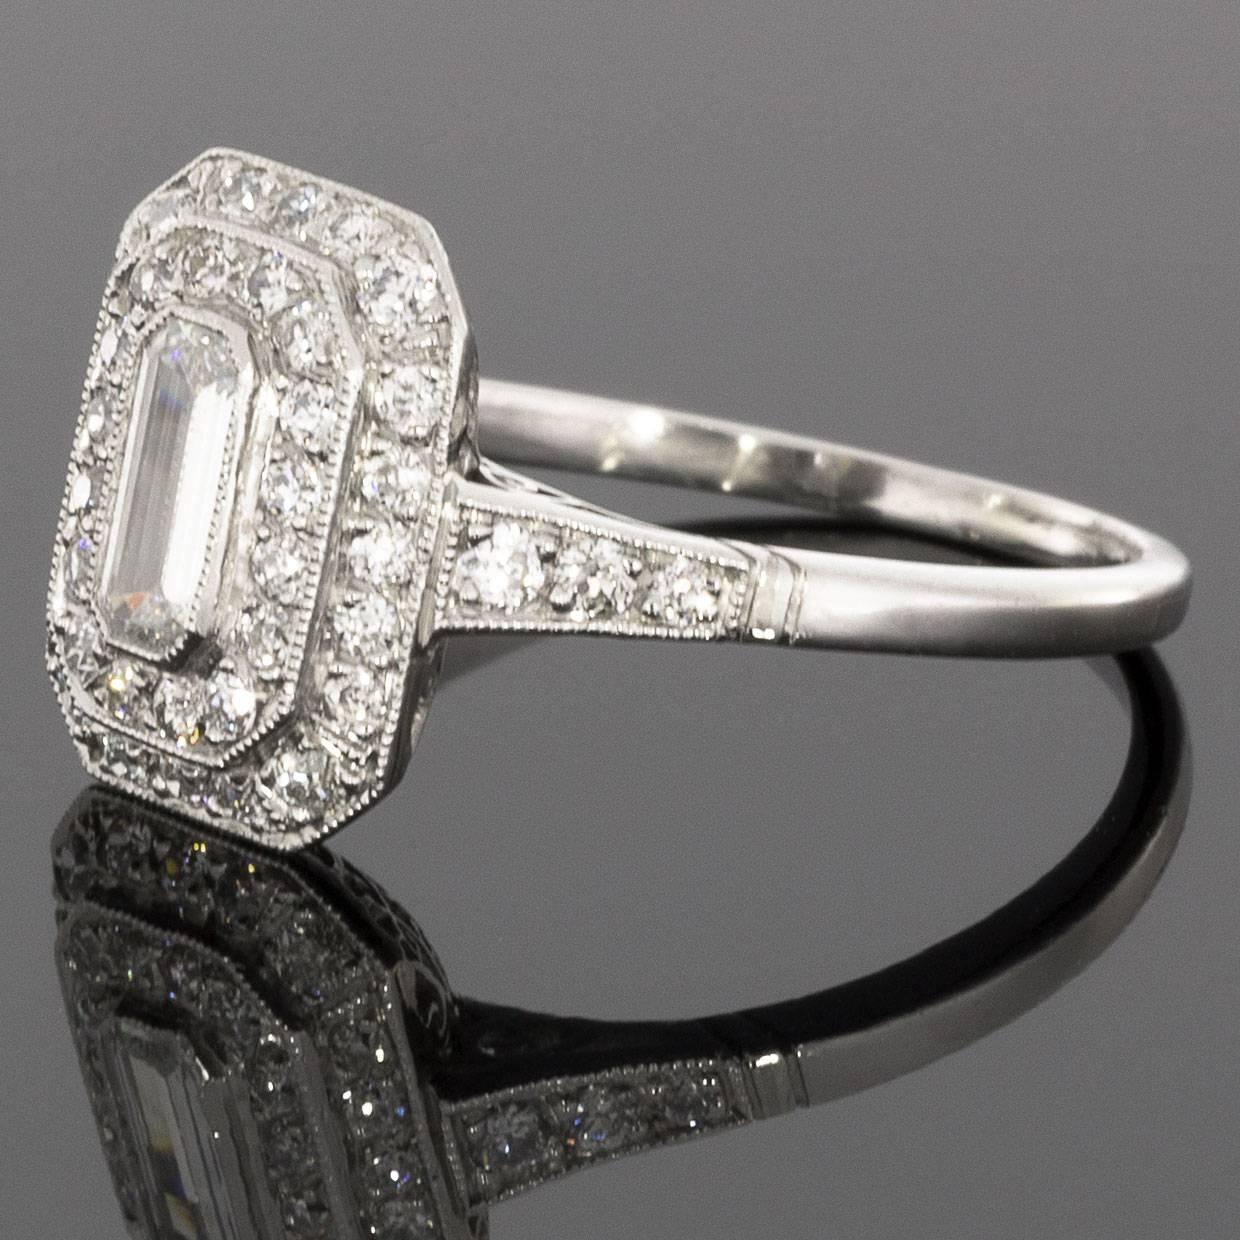 This gorgeous halo engagement ring has a big look with its lovely double halo flowing gracefully from the petite, diamond shoulder shank. The center diamond is a .70 carat emerald cut diamond that grades as I/SI1 in quality. It is bezel set in the